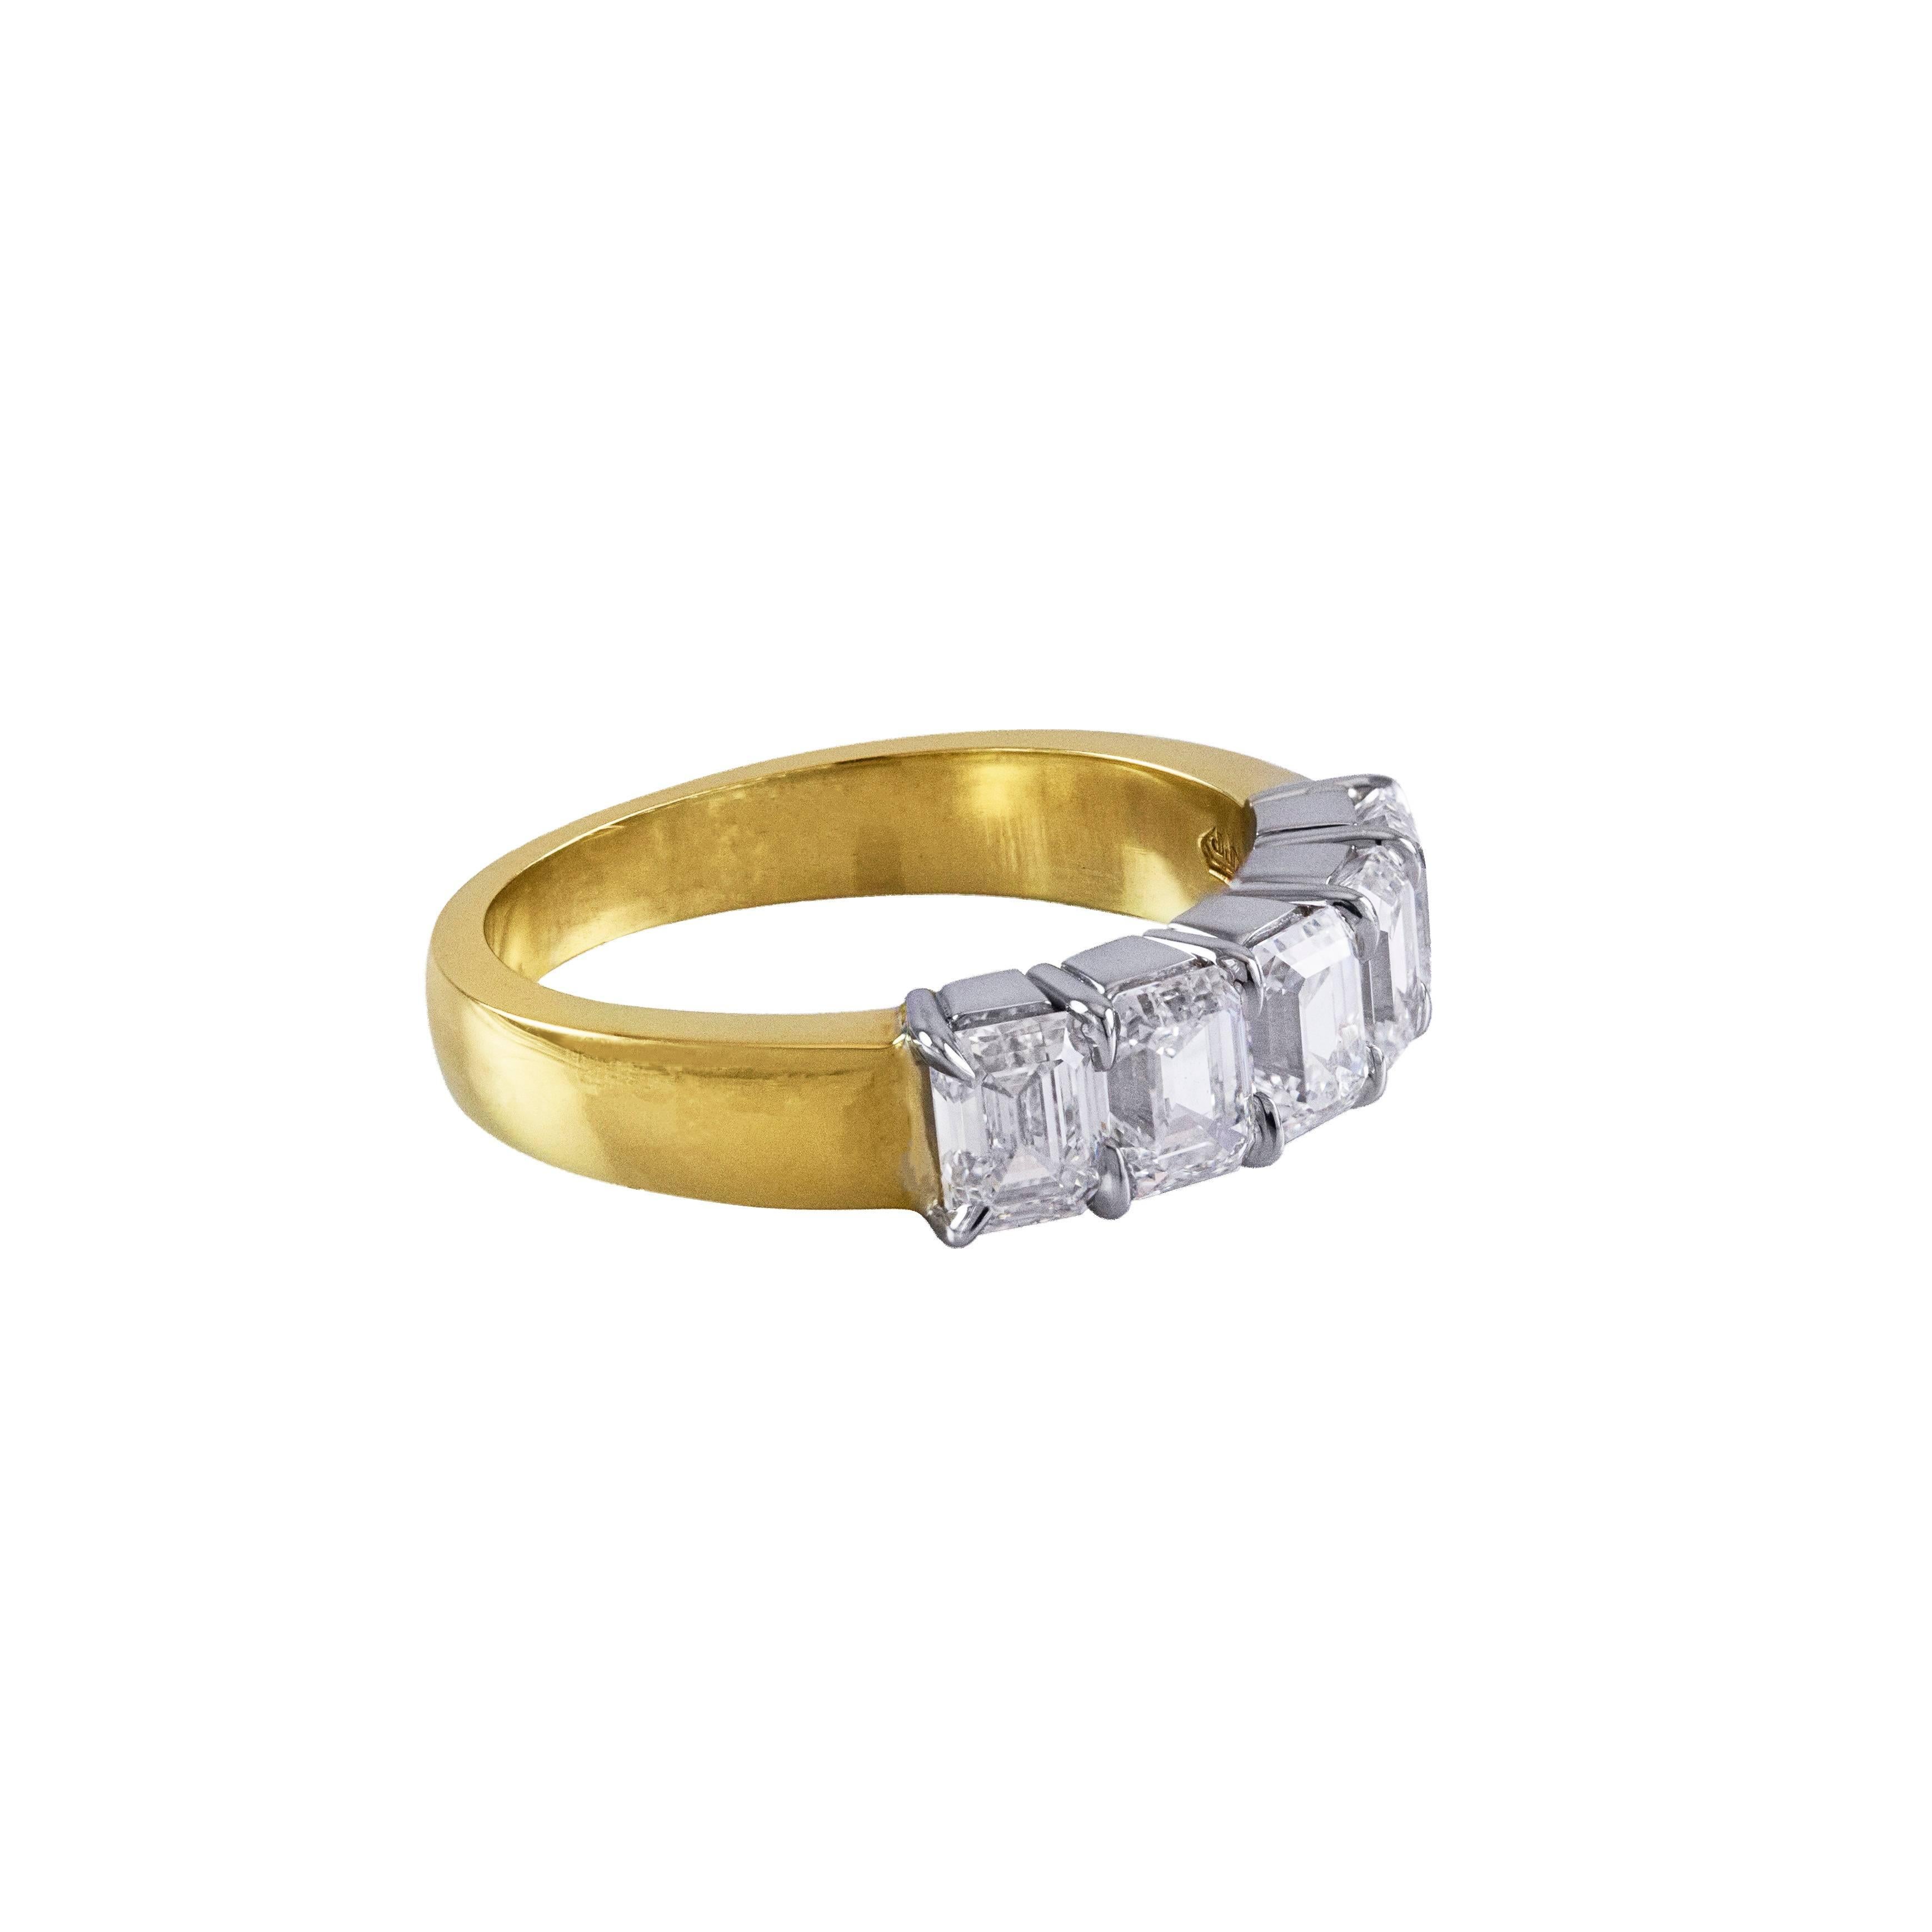 This ring features 5 brilliant emerald cut diamonds weighing 2.01 carats total, set in platinum. The shank is made with 18k yellow gold. Size 6 US (sizable).

Style available in different price ranges. Prices are based on your selection of the 4C’s